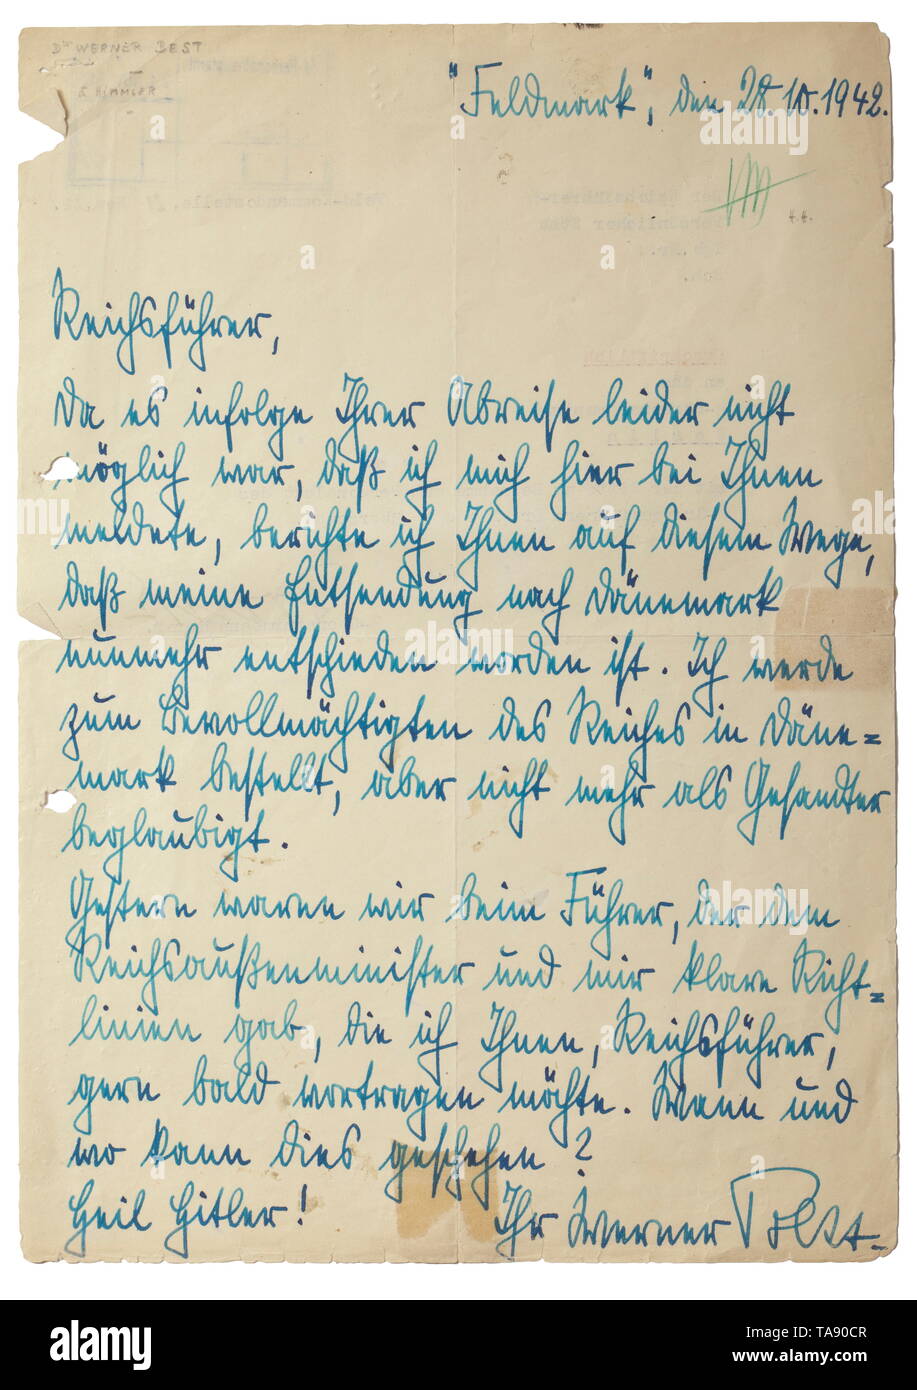 SS-Obergruppenführer Dr. Werner Best - a letter to the Reichsführer-SS Written on 28 October 1942 to (tr.) 'Reichsführer, because of your departure it was not possible for me to tell you, so I will notify you in this way that my posting to Denmark has been decided. I will be appointed as Reich Plenipotentiary in Denmark, but no longer accredited as ambassador. Yesterday we were with the Führer, who gave the Reich foreign minister and me clear instructions which I want to recite to you soon, Reichsführer. When and where can this happen? Heil Hitler your Werner Best'. The upp, Editorial-Use-Only Stock Photo